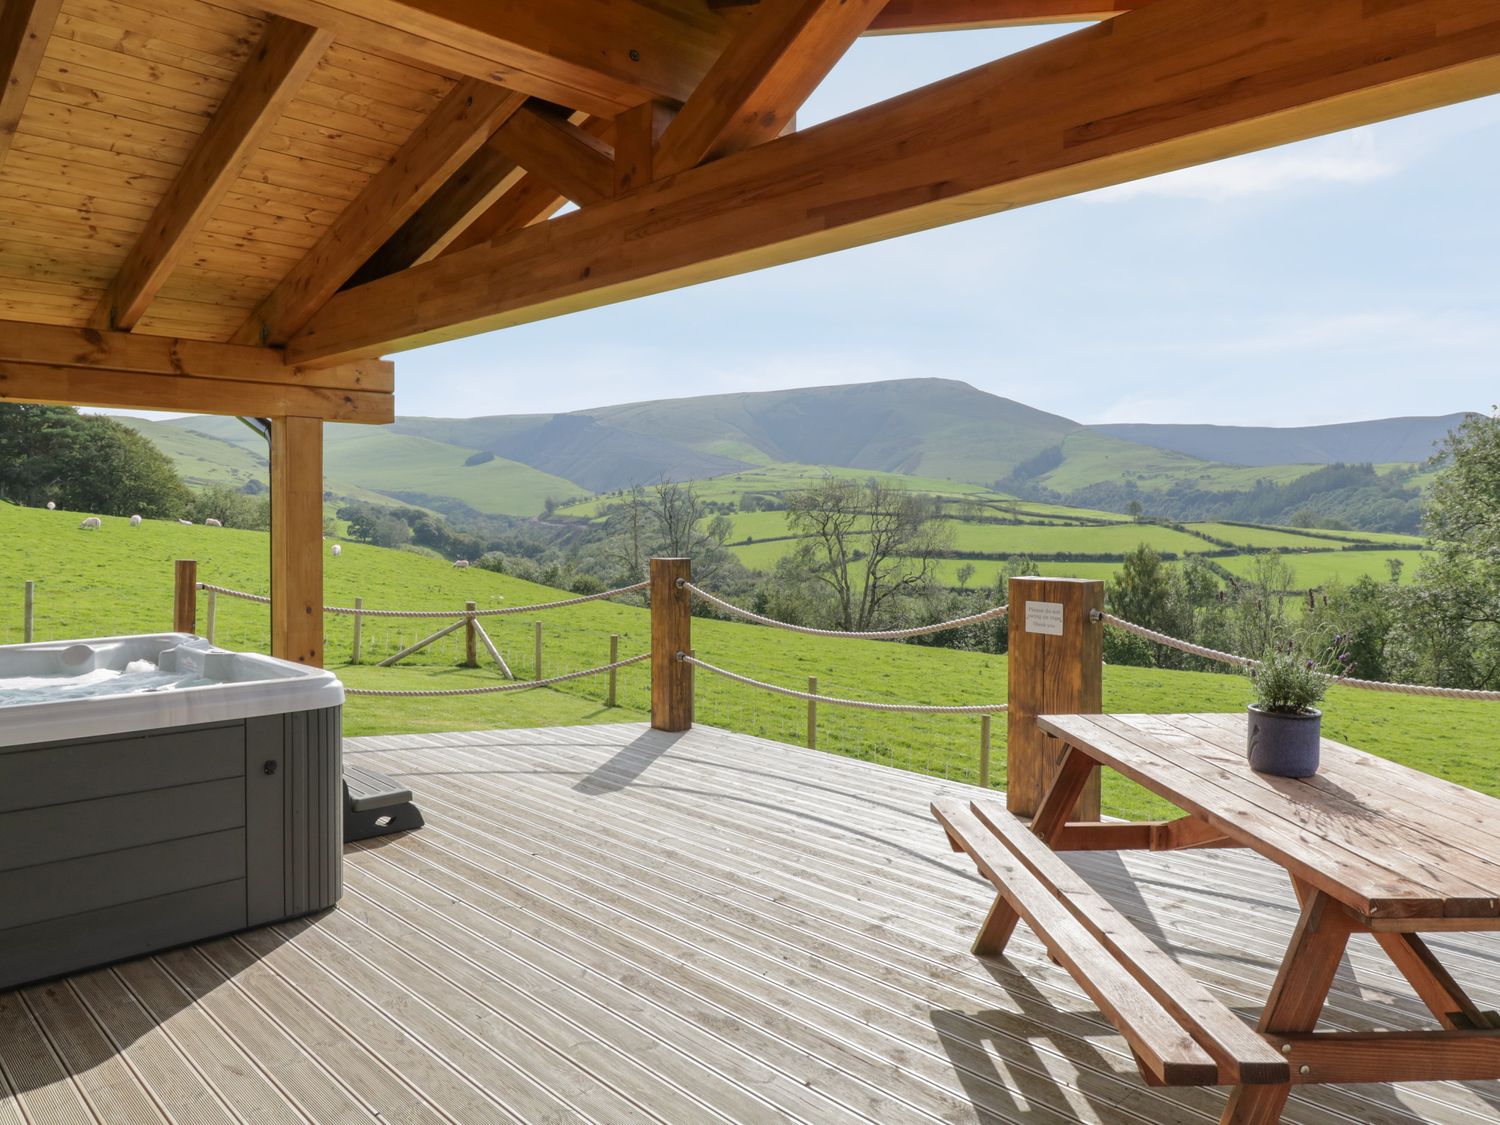 Bryn Eiddon Log Cabin Machynlleth Powys Wales Cottages For Couples Find Holiday Cottages